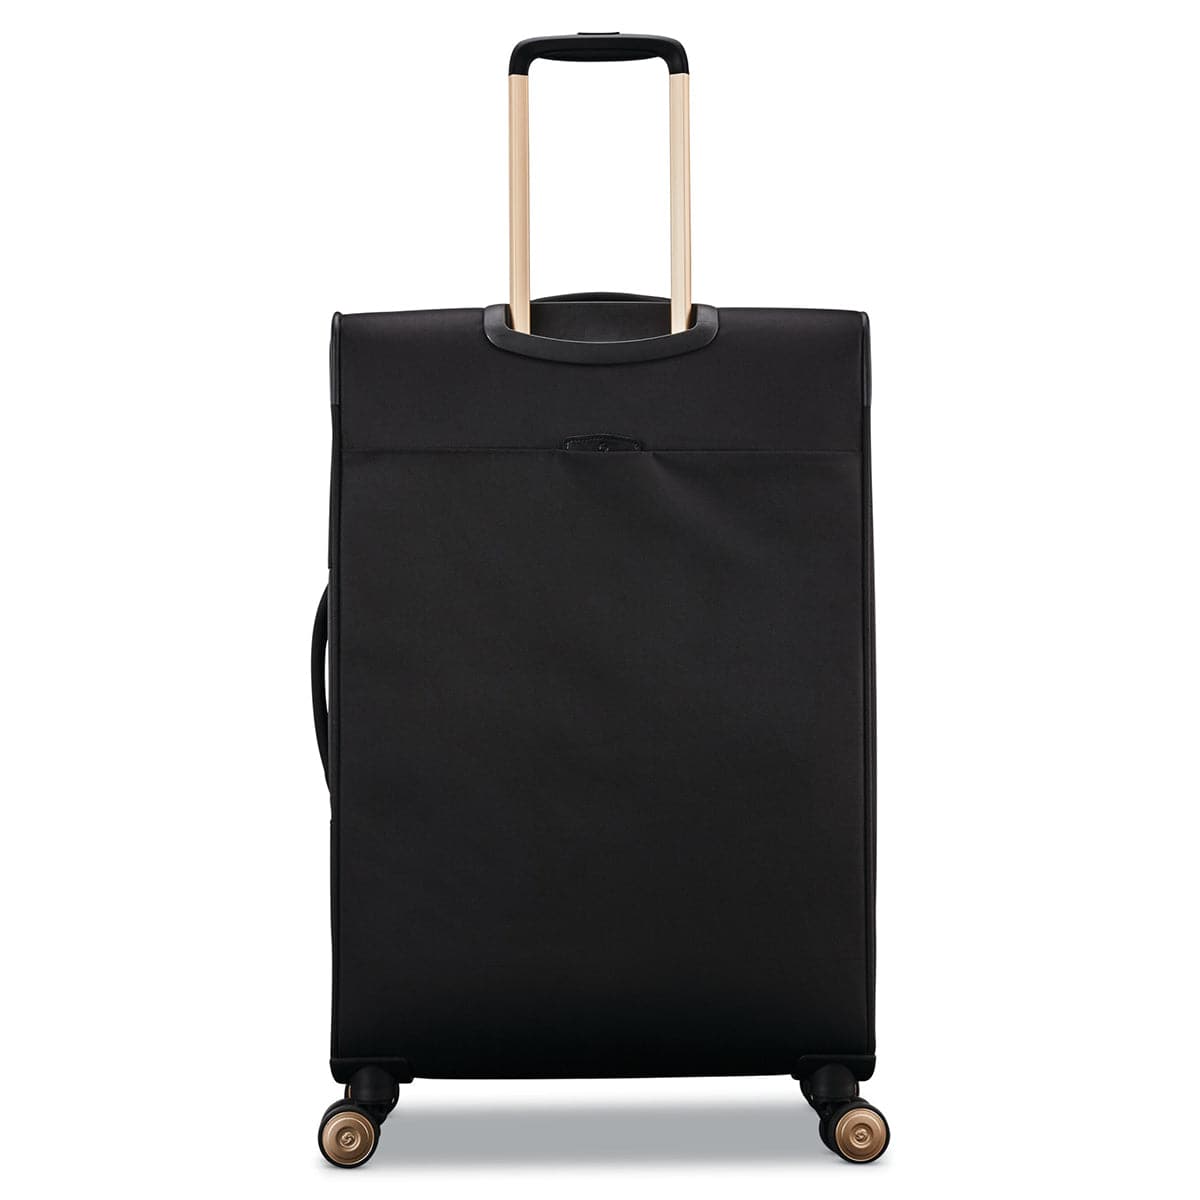 Samsonite Mobile Solution Softside Expandable 25" Spinner Carry-On Luggage